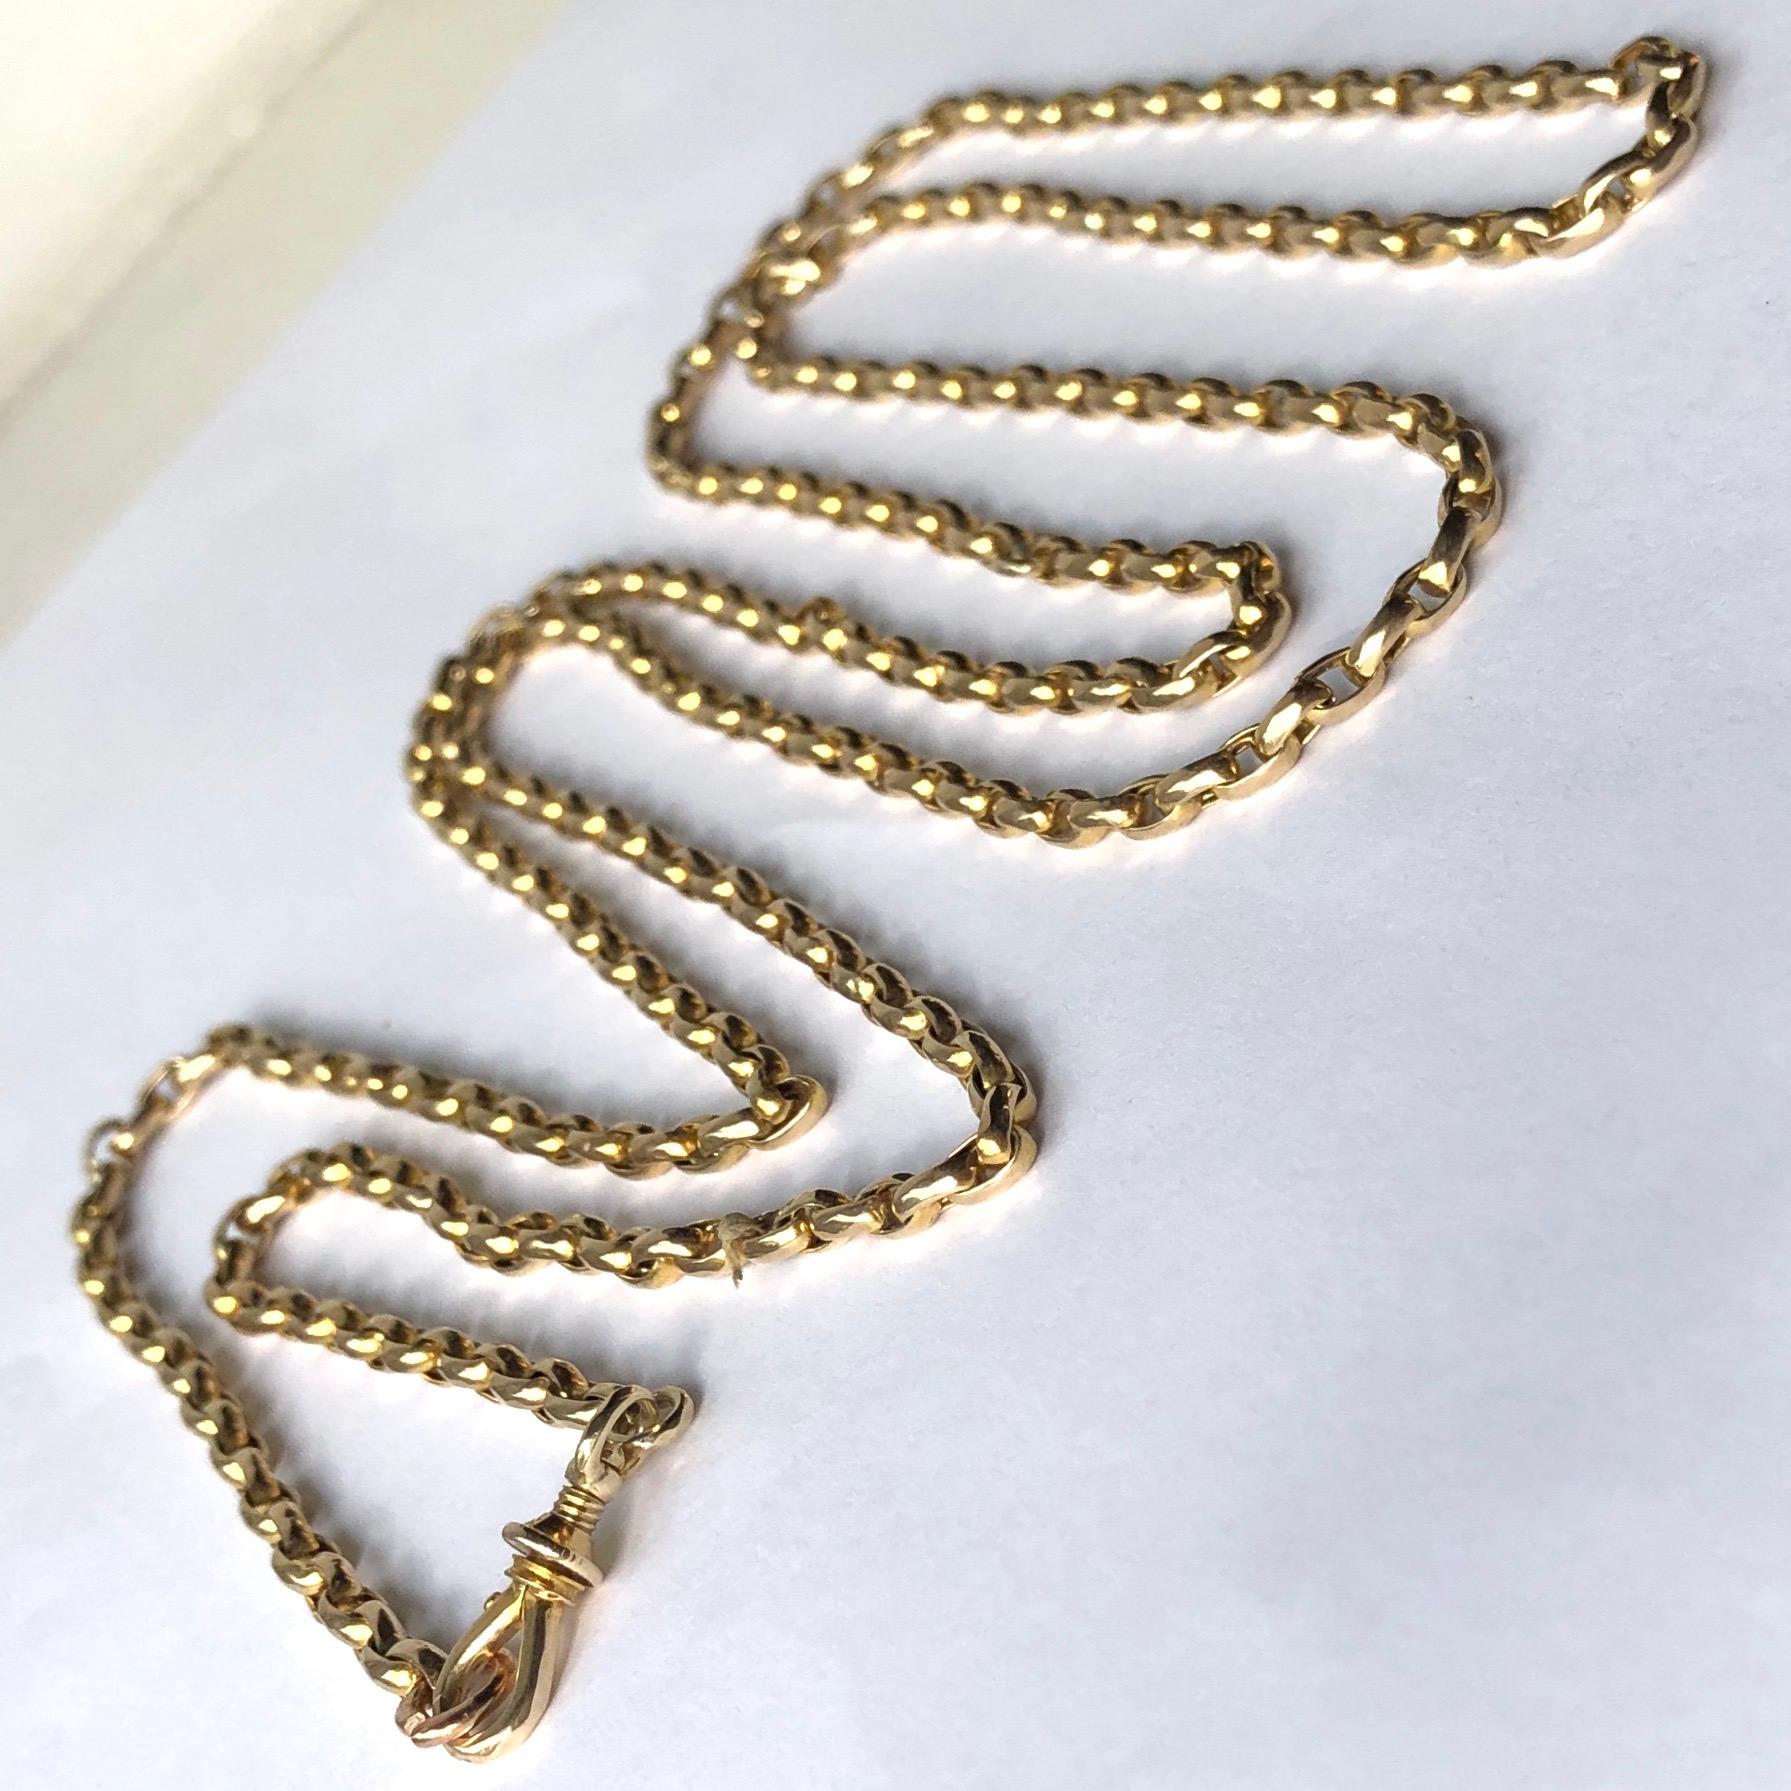 Longuard chains are so versatile and can be worn in so many ways! This chain is modelled in 9ct gold and there is also a dog clip which fastens the necklace. 

Length: 110cm

Weight: 19.41g